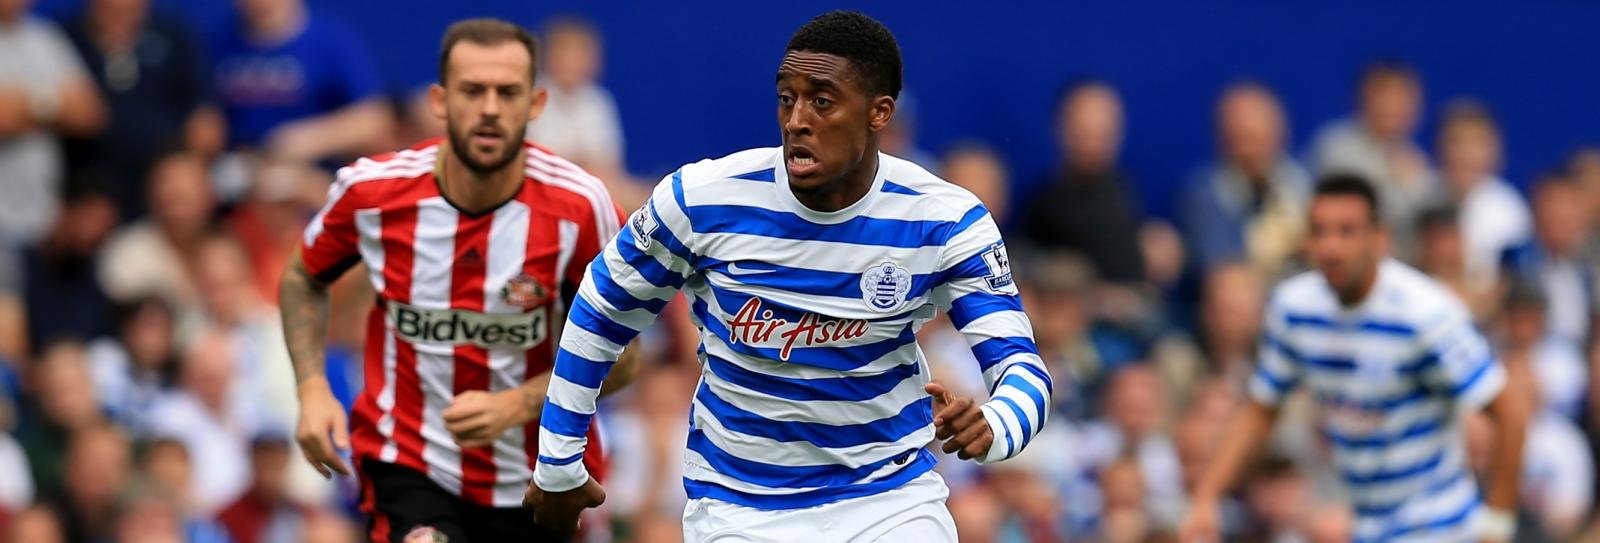 Interview: Leroy Fer says the QPR players will “try everything” to finish in the play-offs